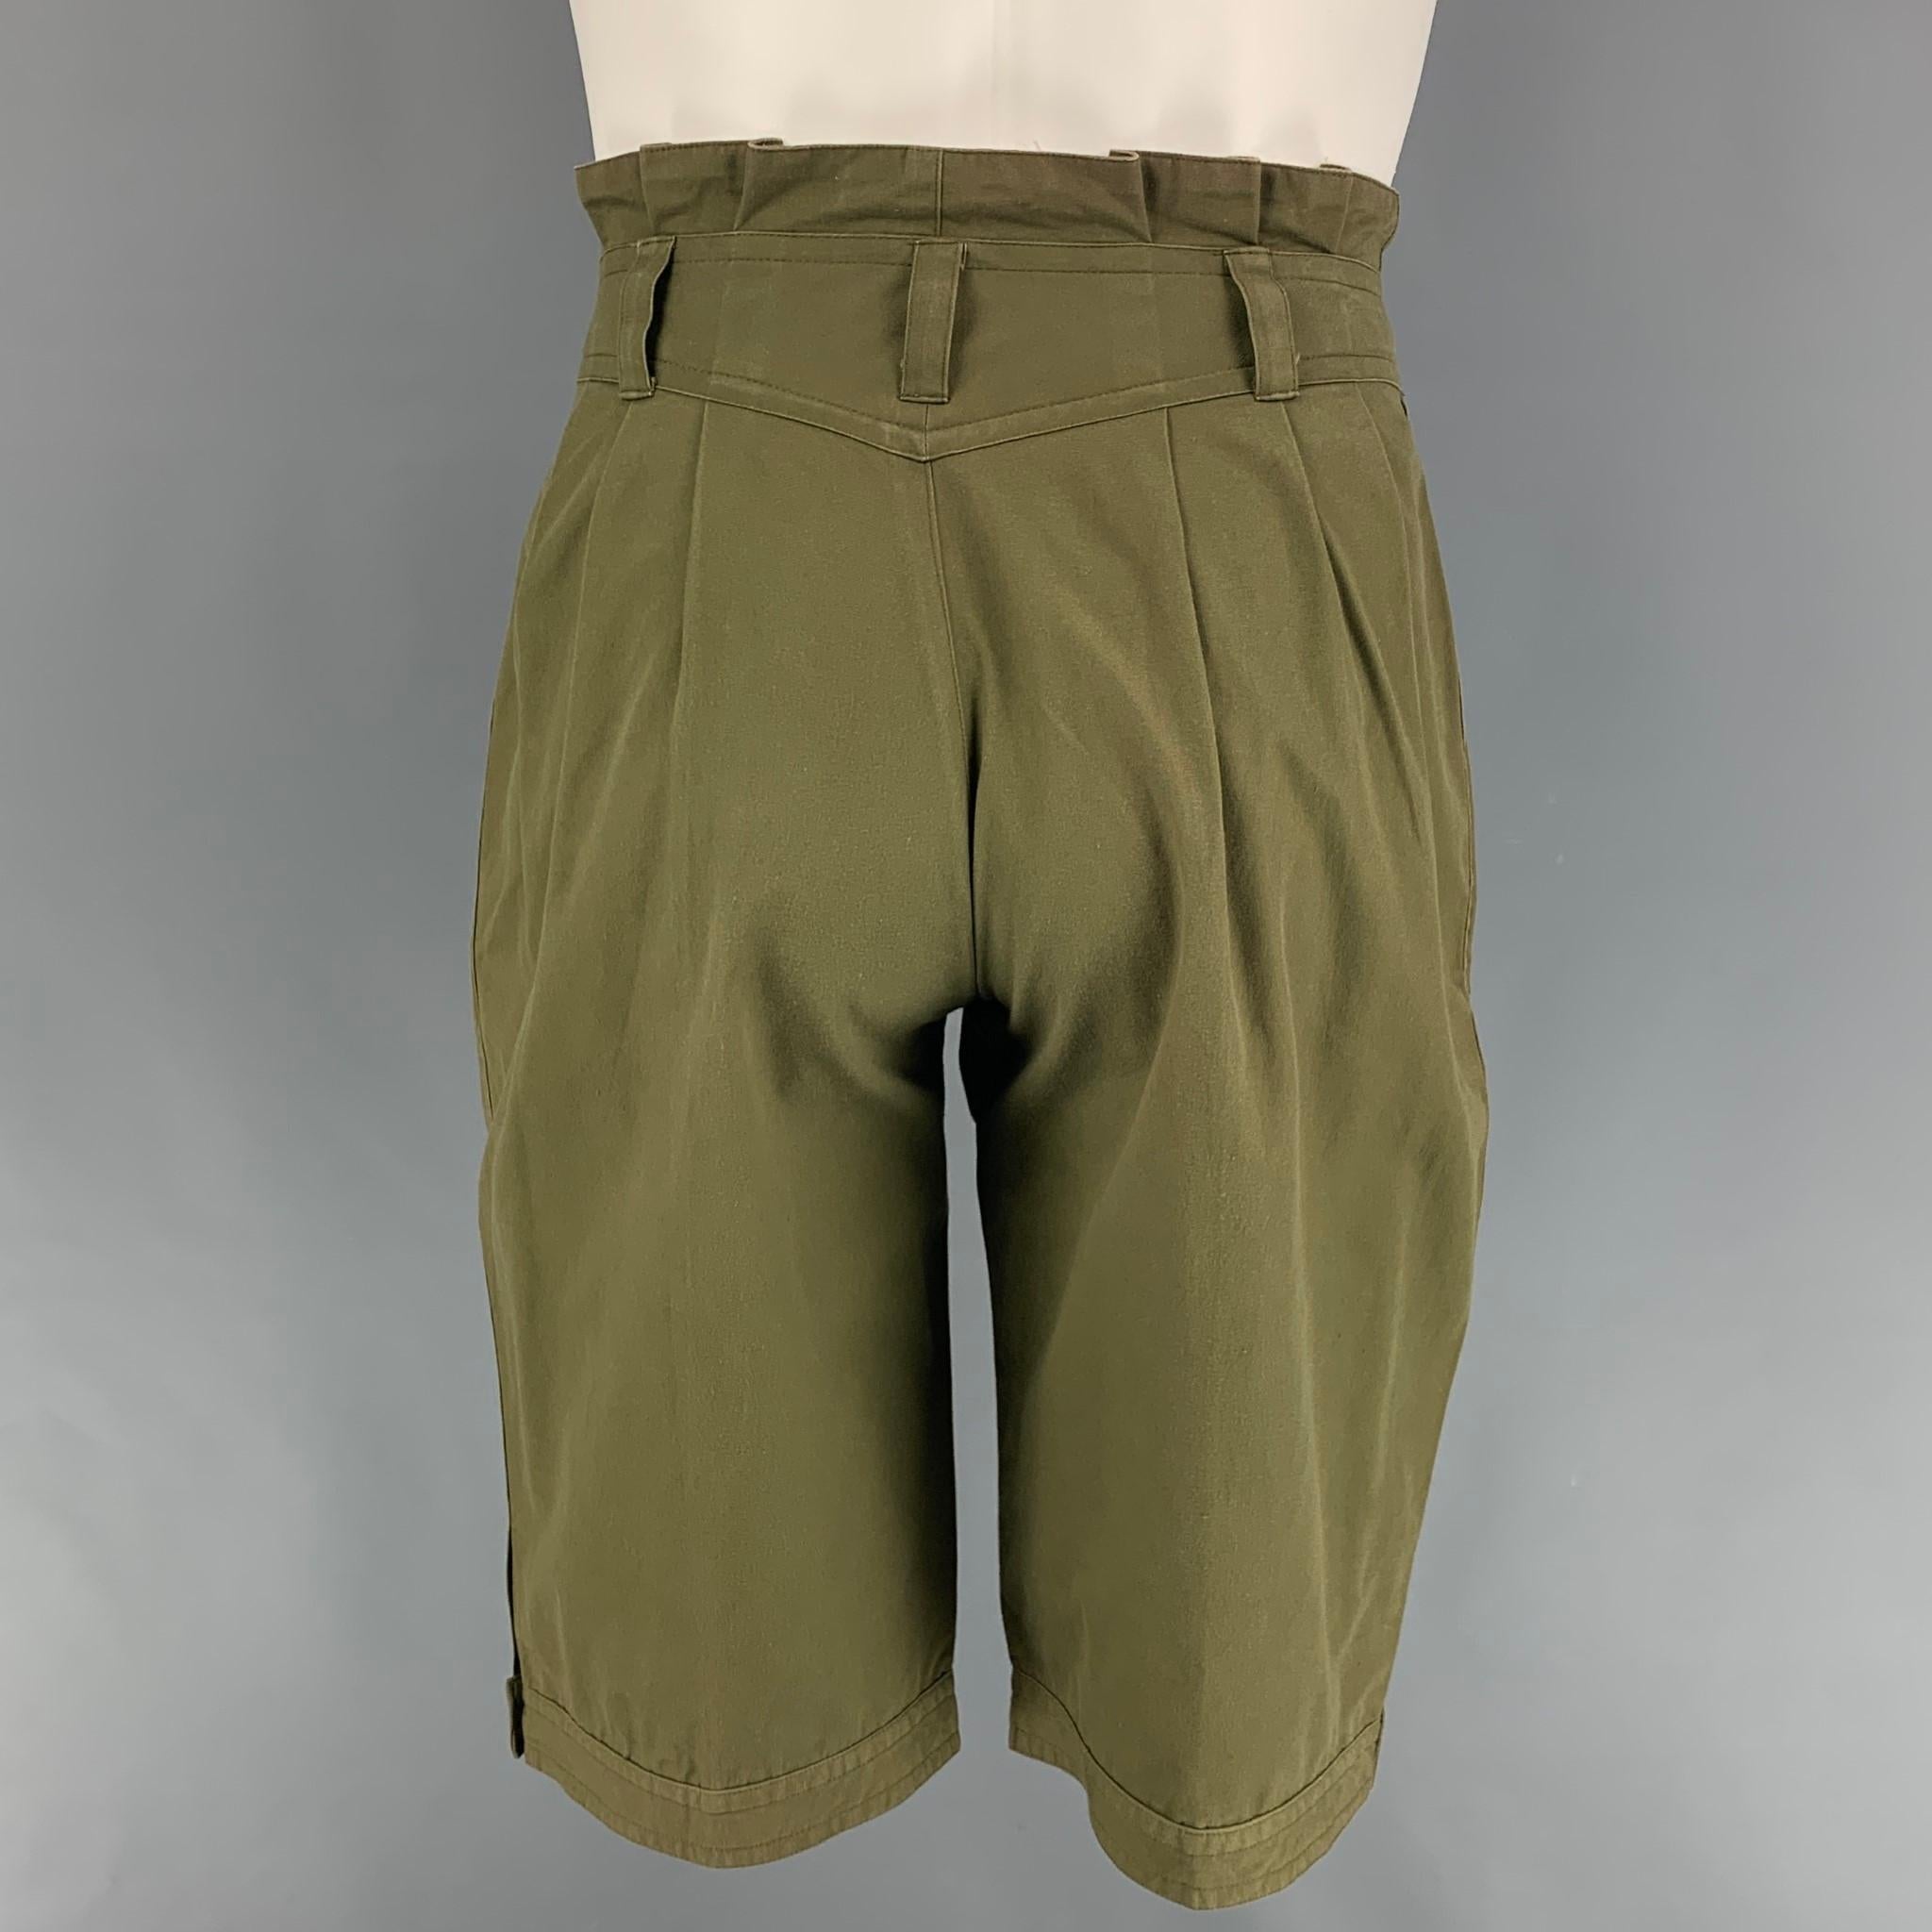 Vintage KANSAI YAMAMOTO shorts comes in a olive cotton featuring a pleated style, ruffled trim, snap button details, zip fly, and a double snap button closure. Made in Japan. 

Very Good Pre-Owned Condition.
Marked: 28

Measurements:

Waist: 29